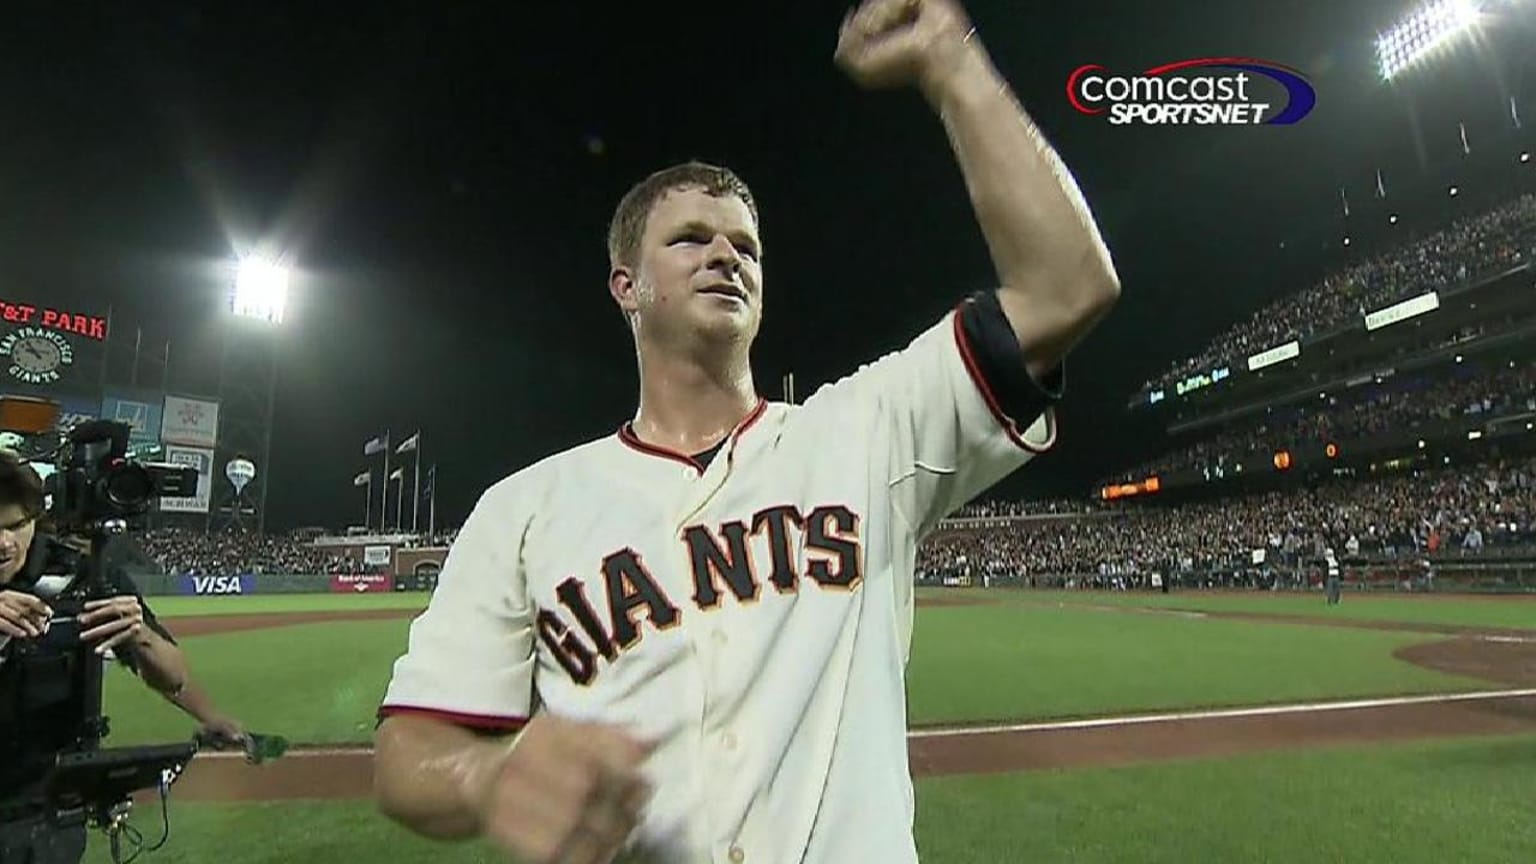 Cain completes perfect game, 06/13/2012